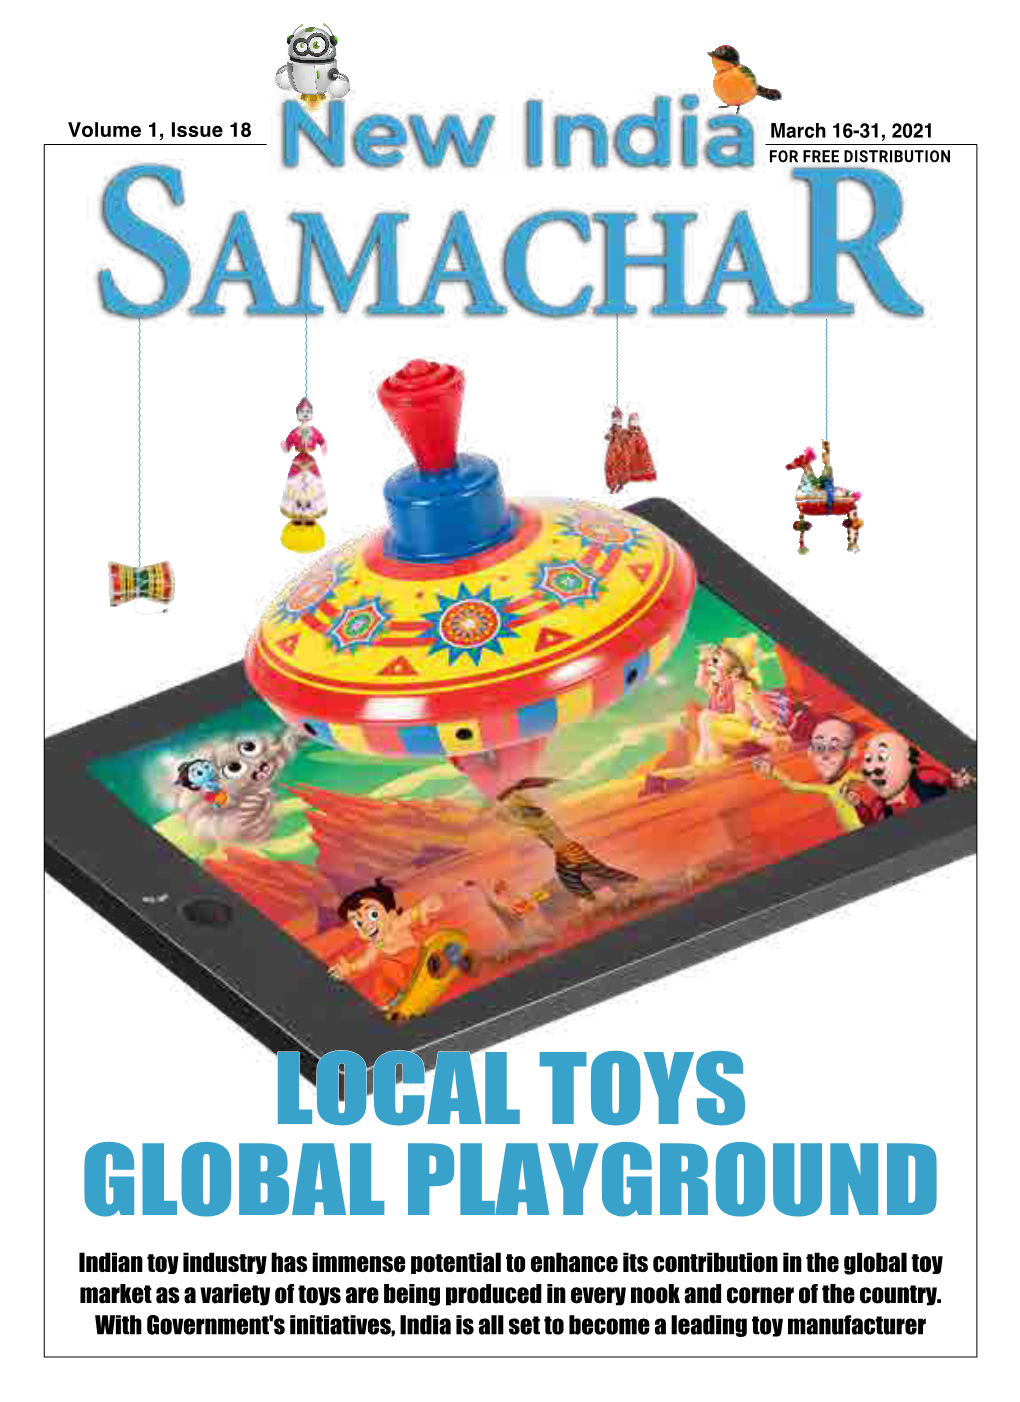 Local Toys Global Playground